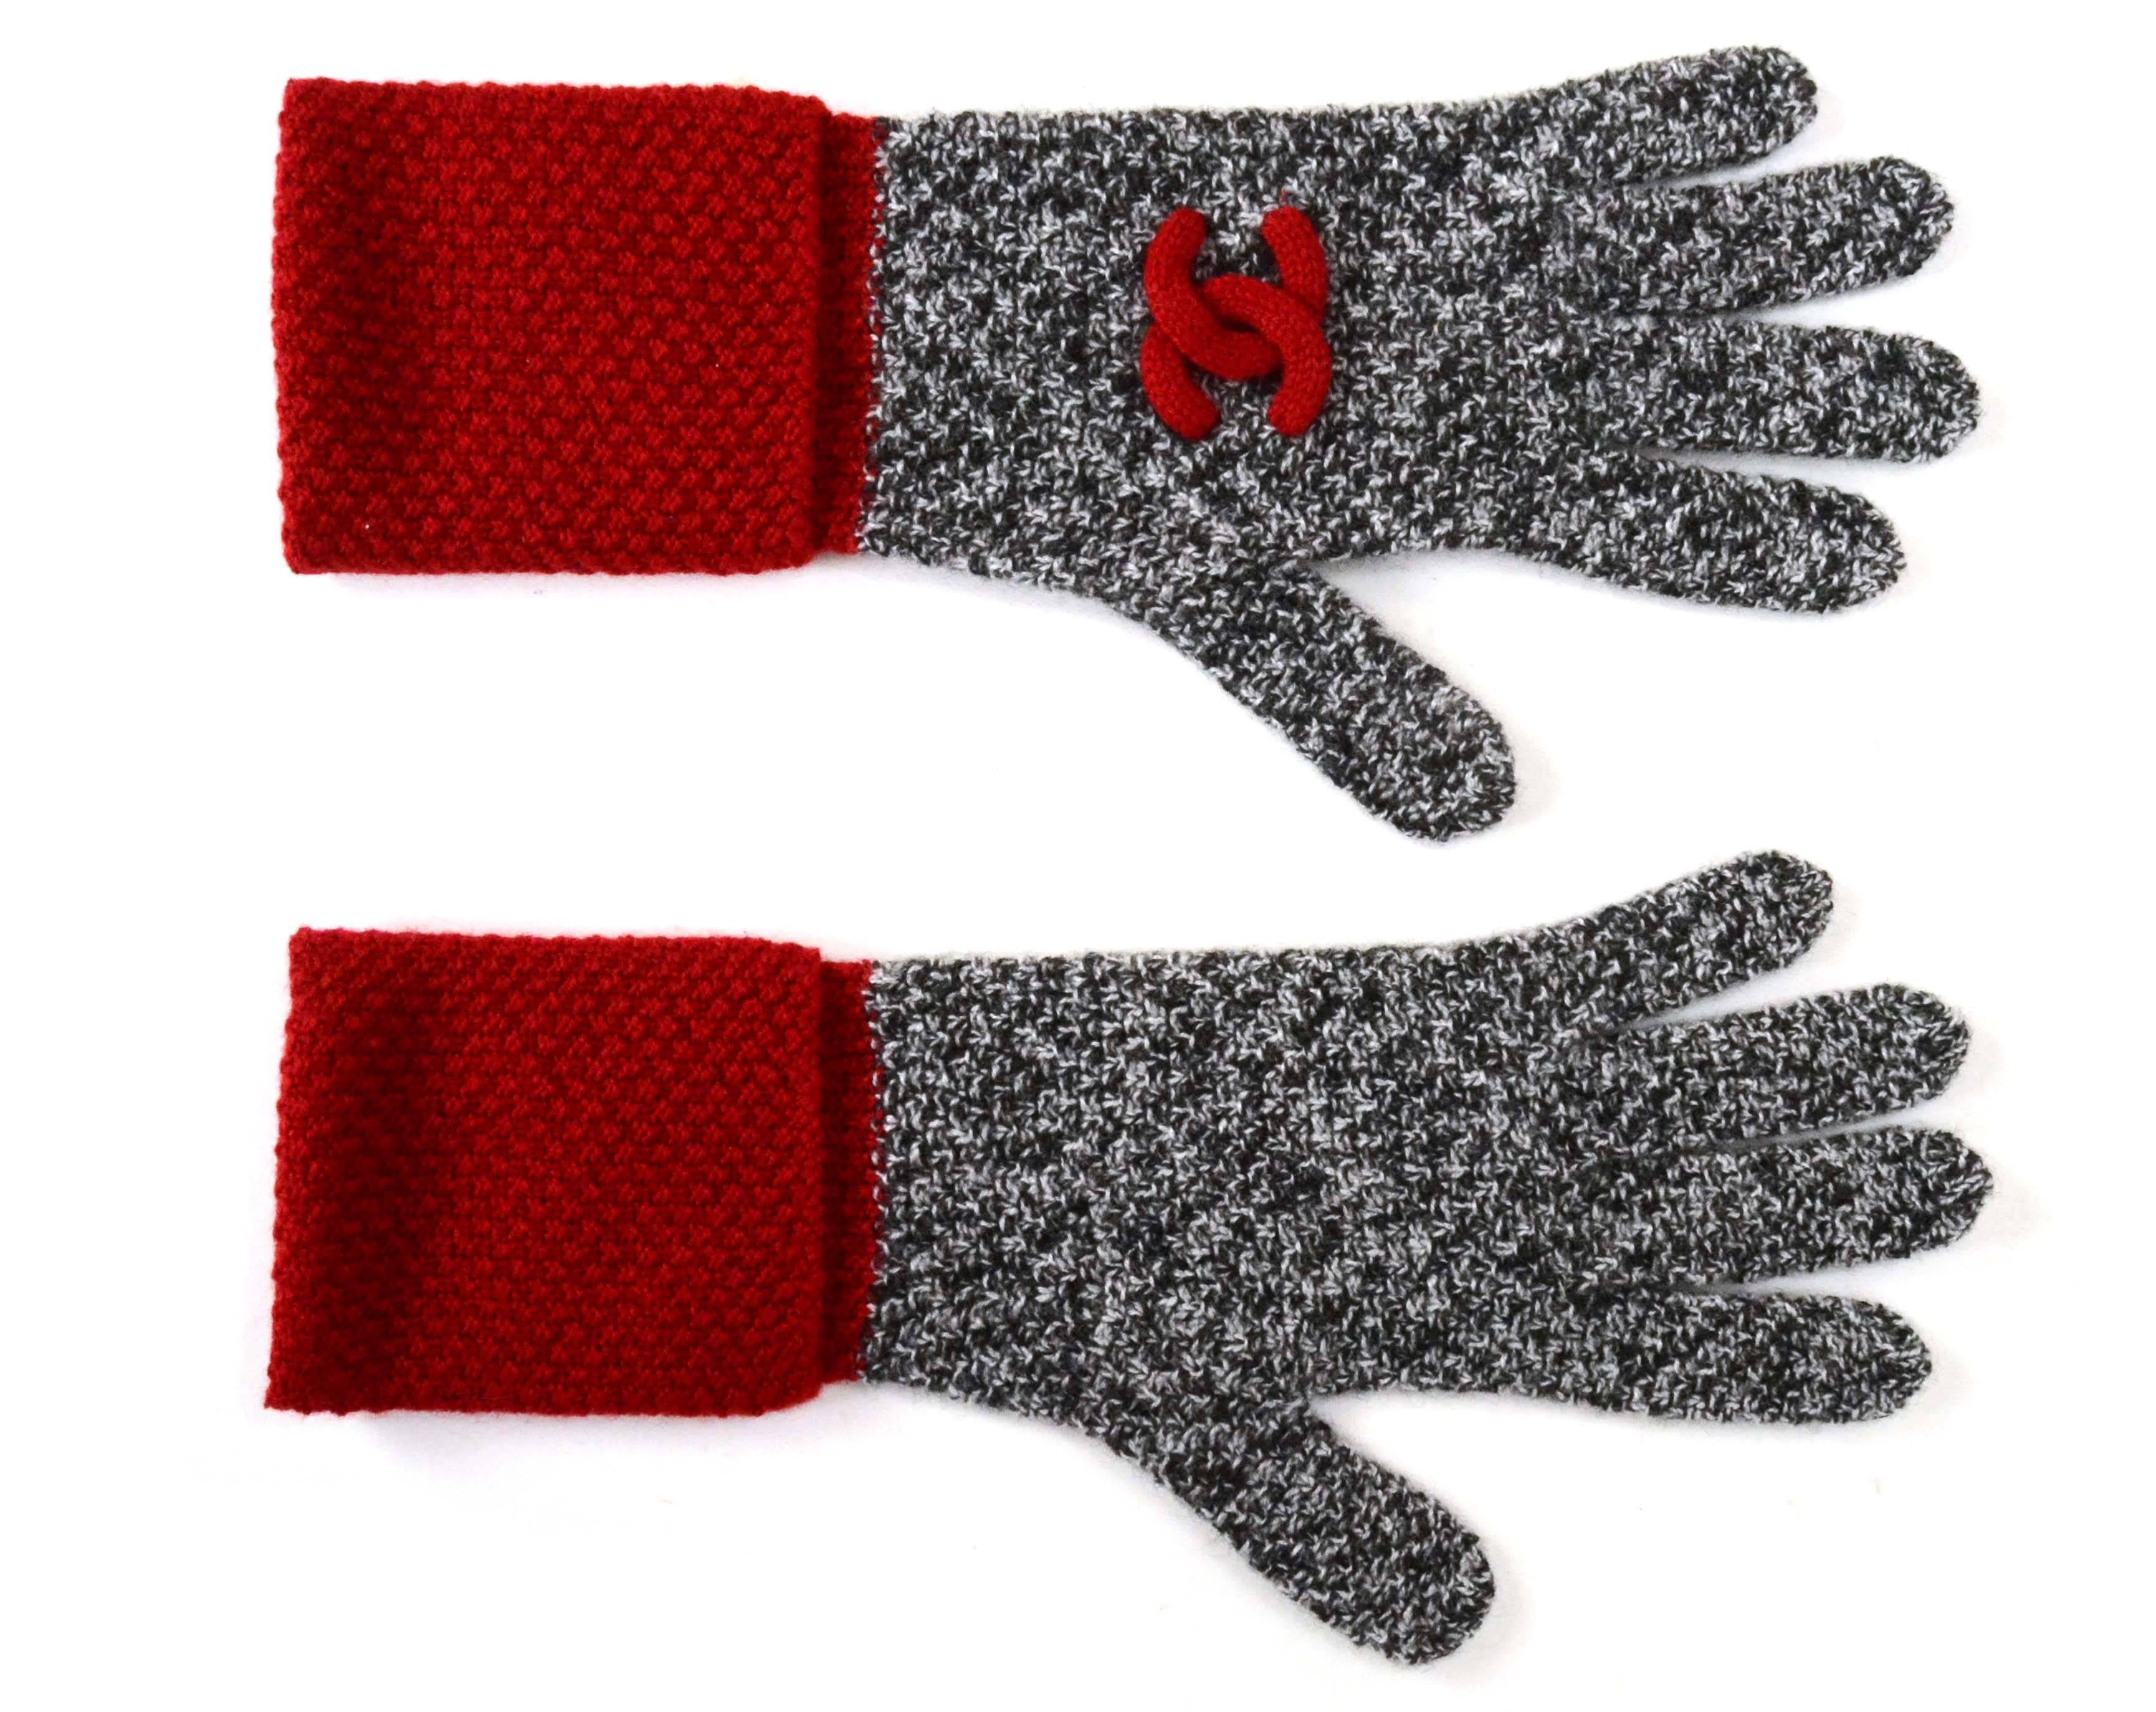 Features black and white knit with red trim.  Black and white CC on hat, red CC on gloves and black and white CC on scarf

-Made in: Great Britian
-Color:  Black and white wih red trim
-Composition: 100% casmere
-Overall Condition: Excellent